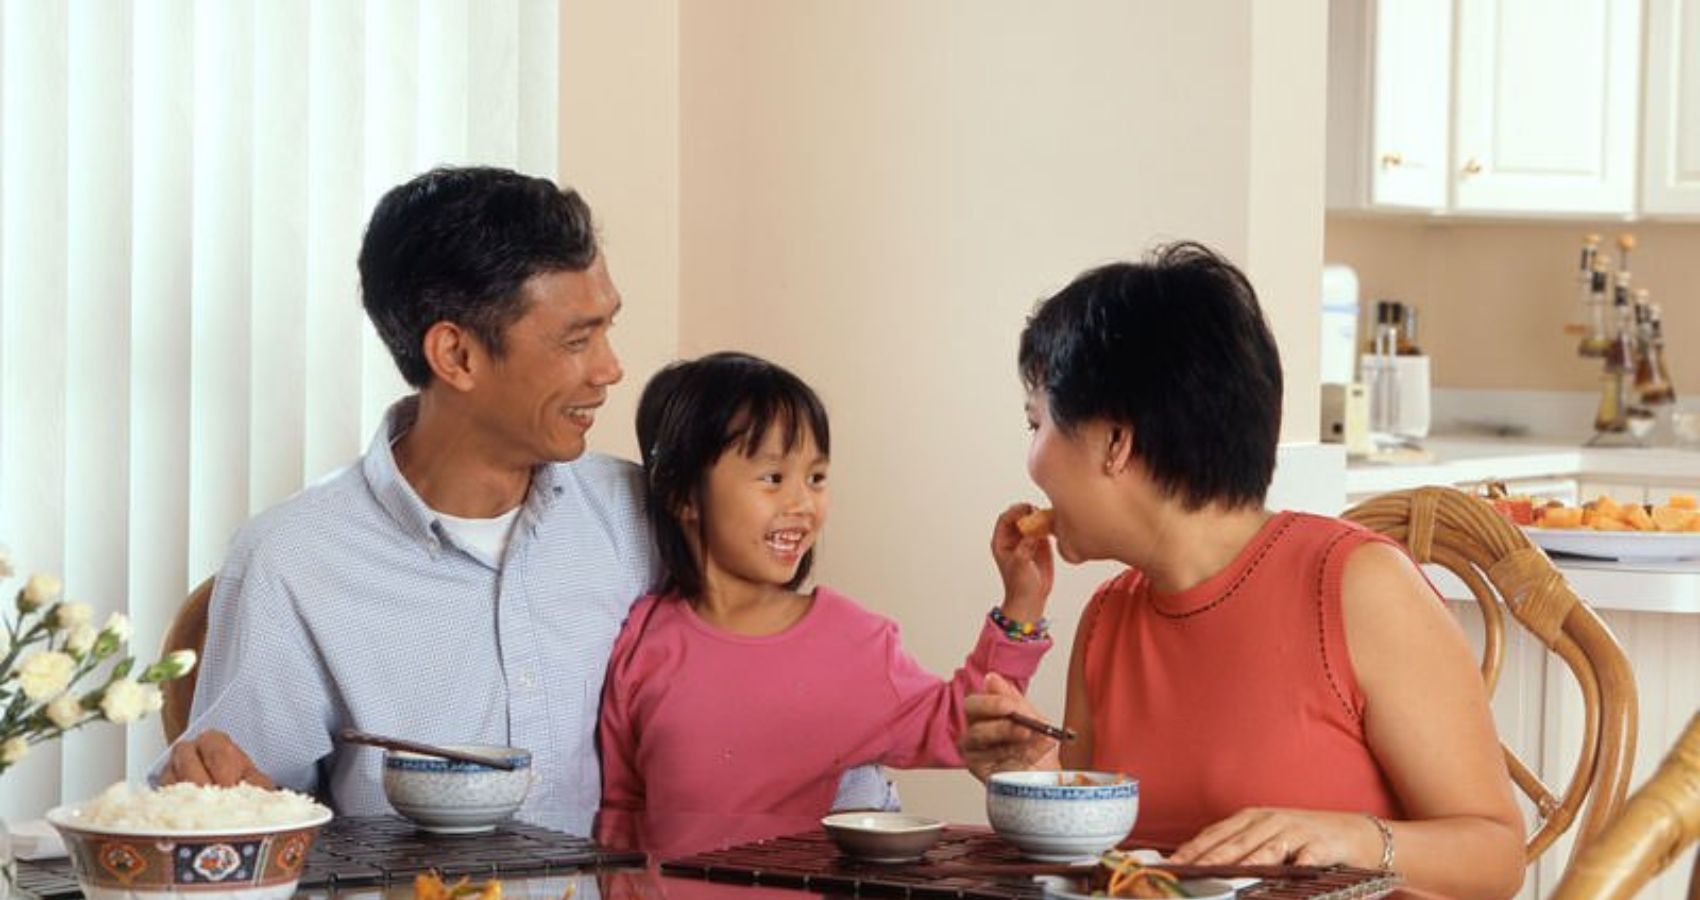 Asian Americans’ Health Poorly Understood, Study Finds